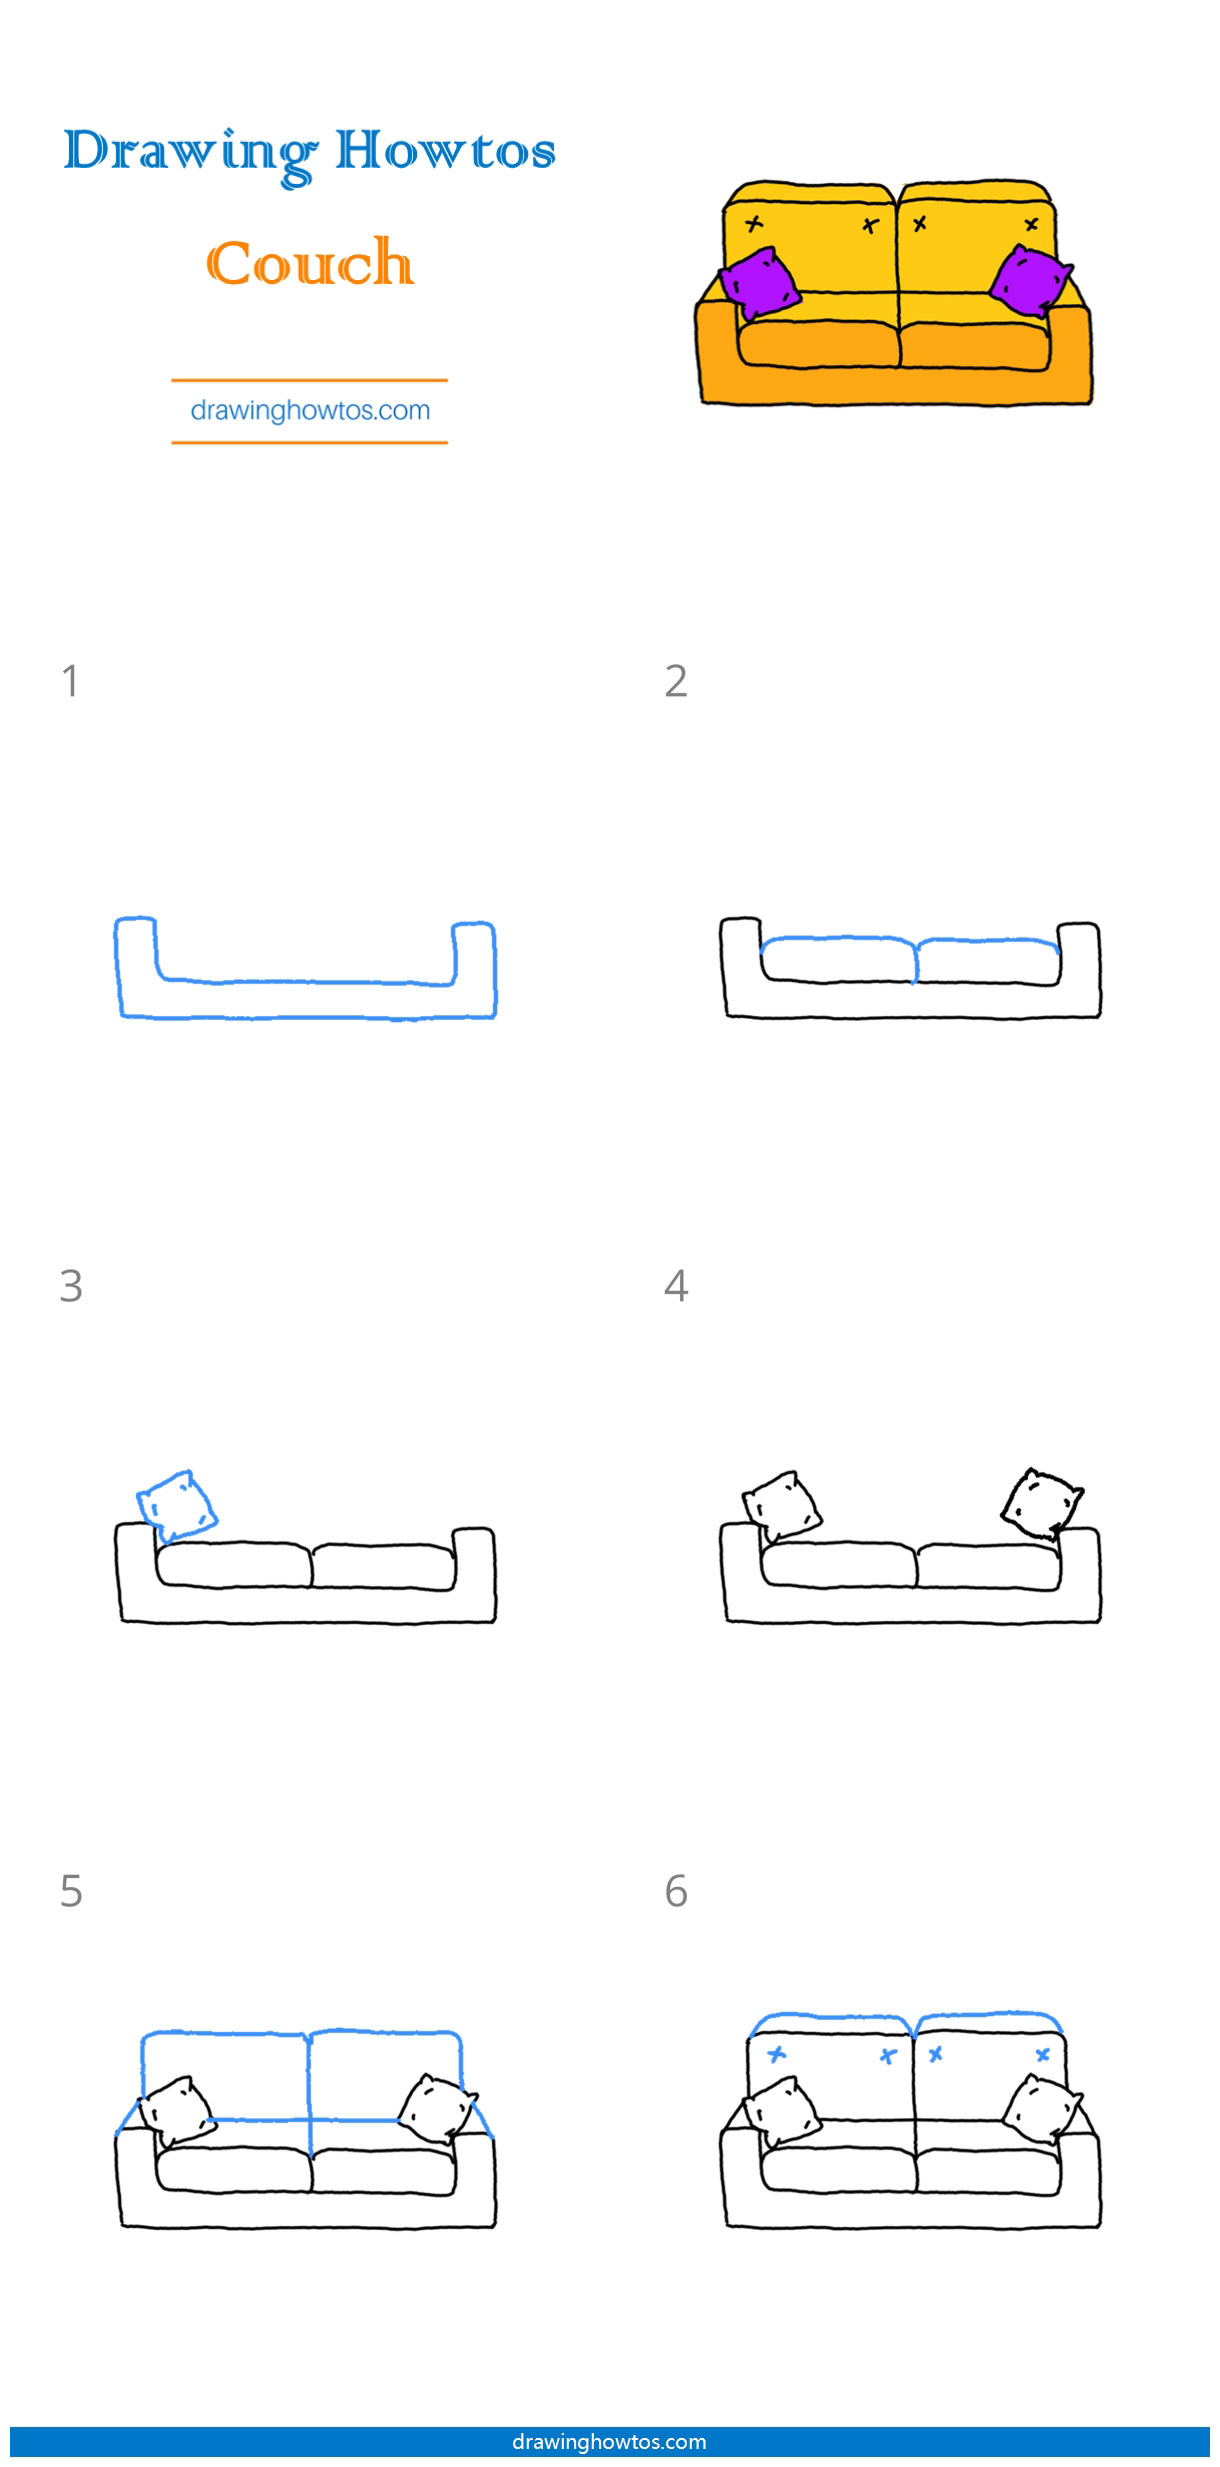 How to Draw a Couch Step by Step Easy Drawing Guides Drawing Howtos